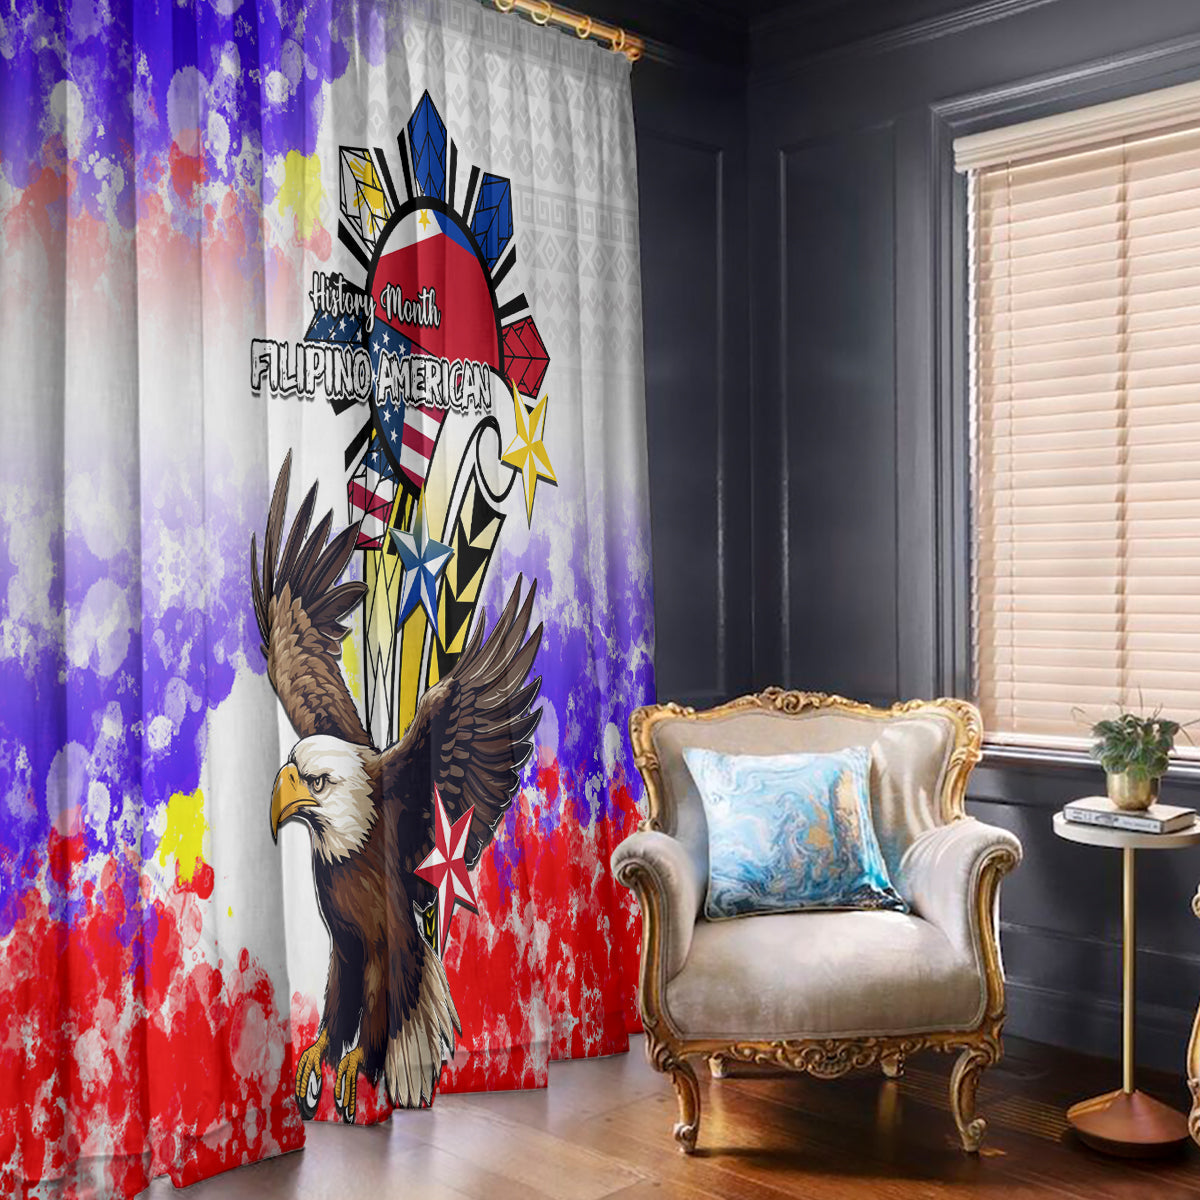 Filipino American History Month Window Curtain The Eight-Rayed Sun Flags With Bald Eagle LT05 White - Polynesian Pride